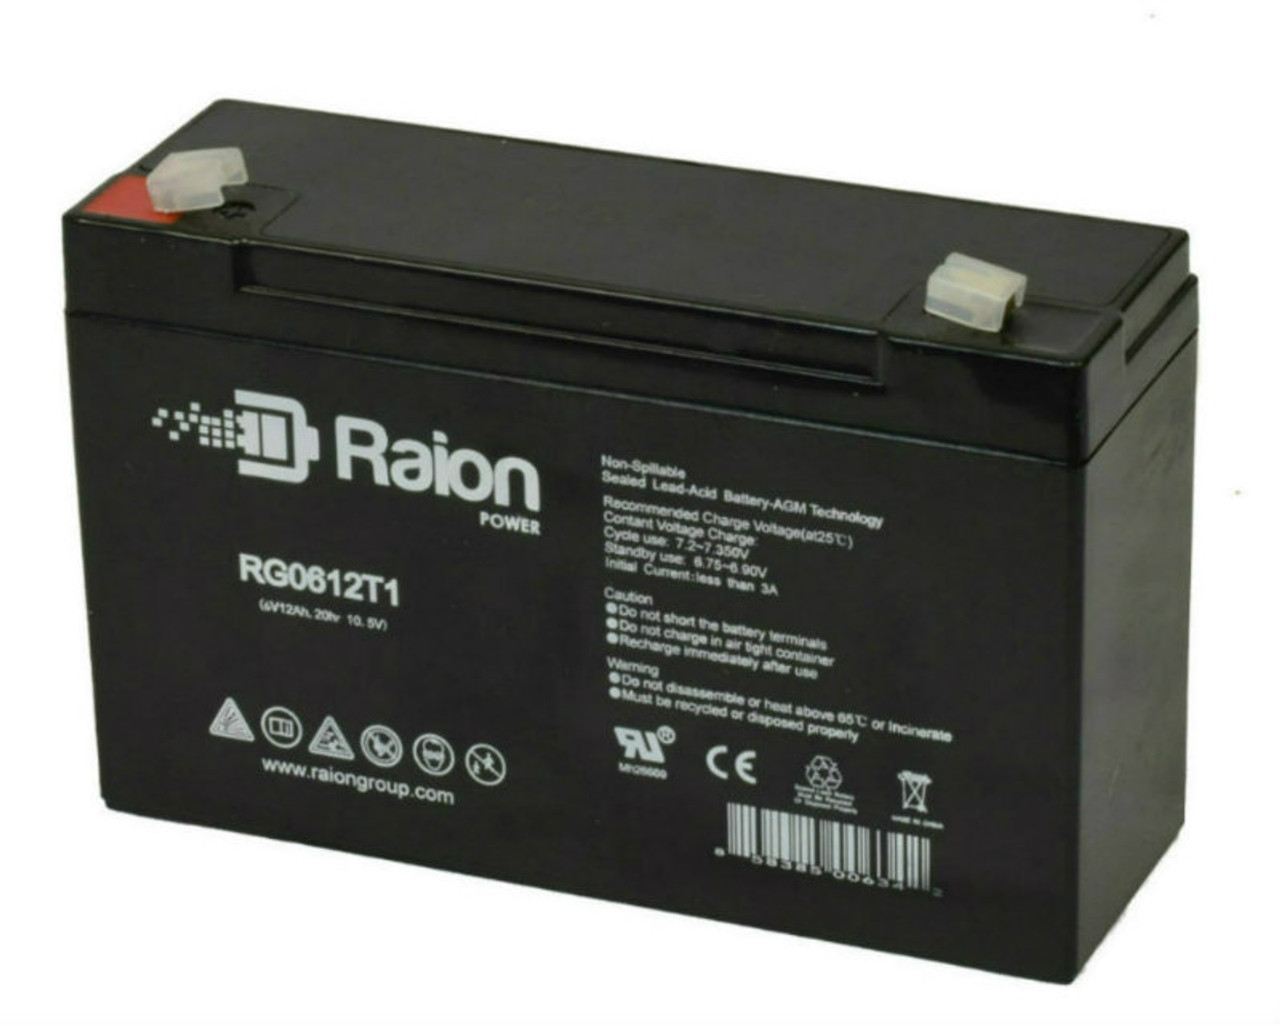 Raion Power RG06120T1 Replacement Battery for LifeLine Switchboard Medical Equipment